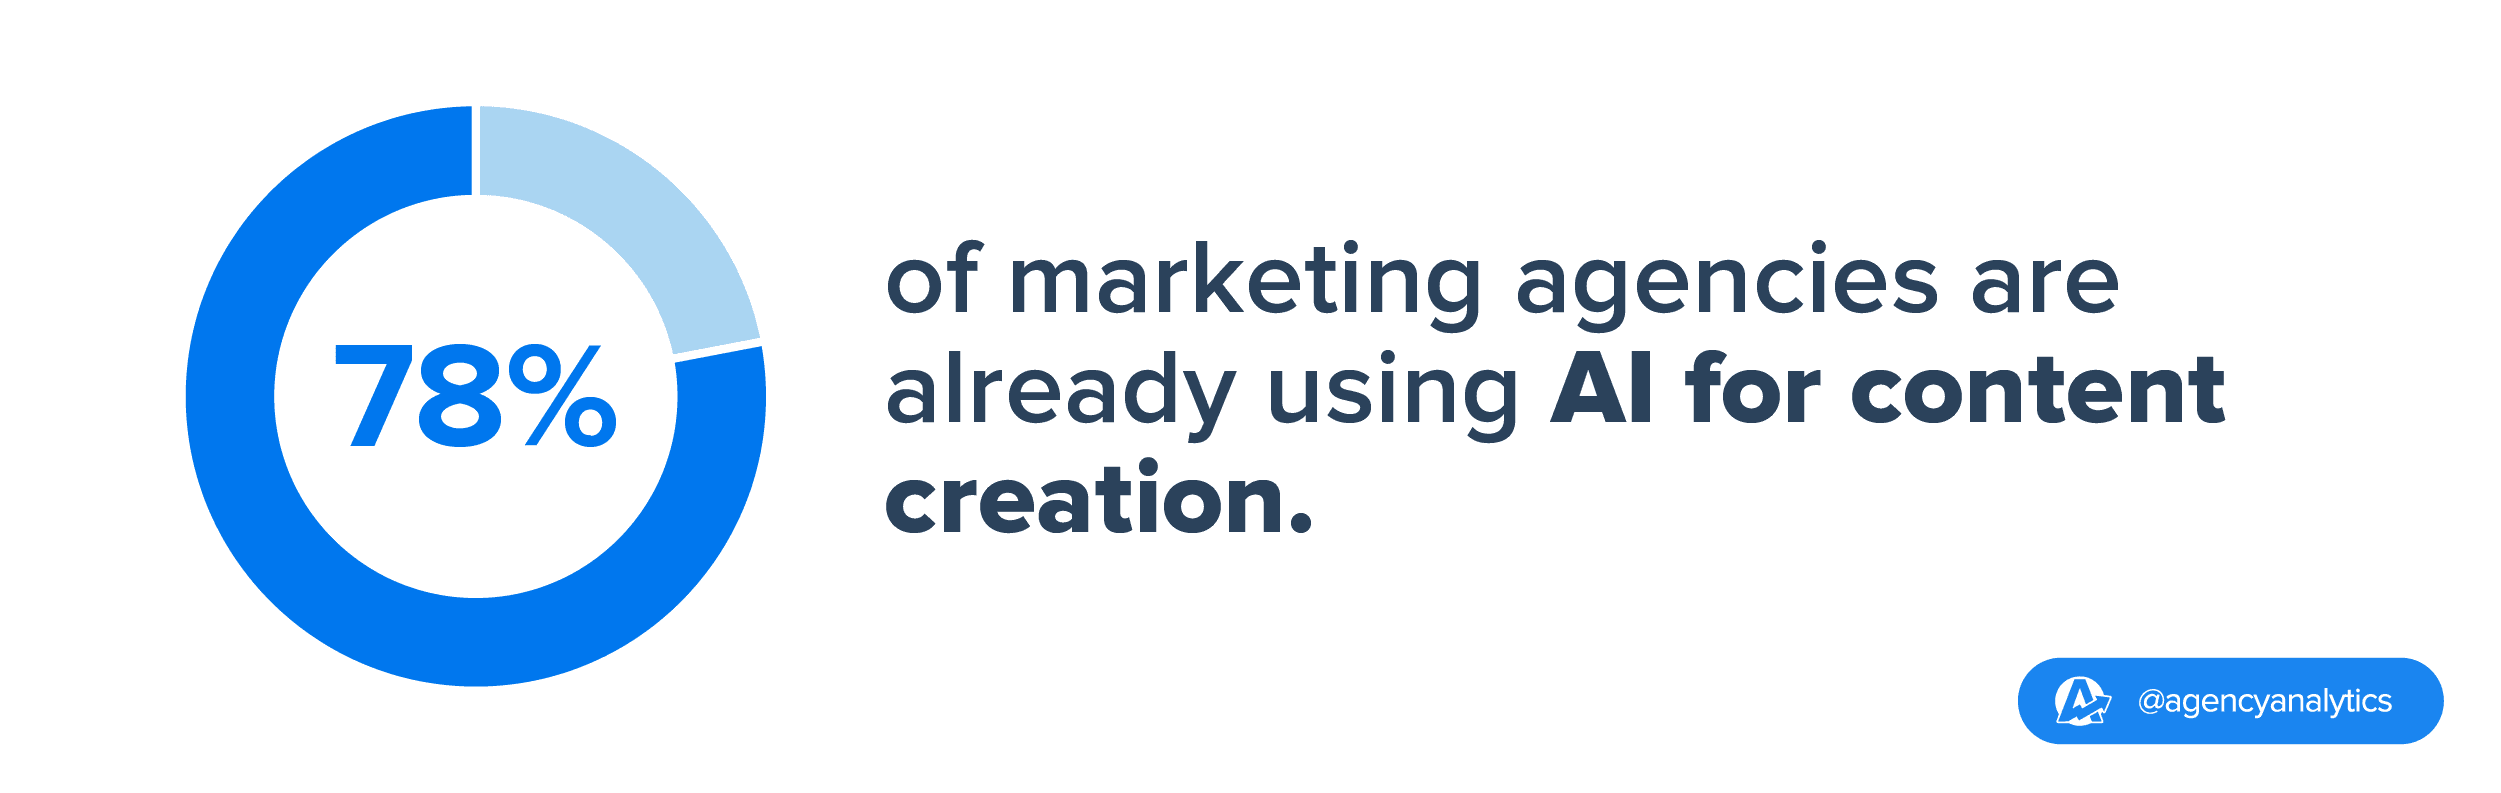 stat on agencies already utilizing AI for content creation